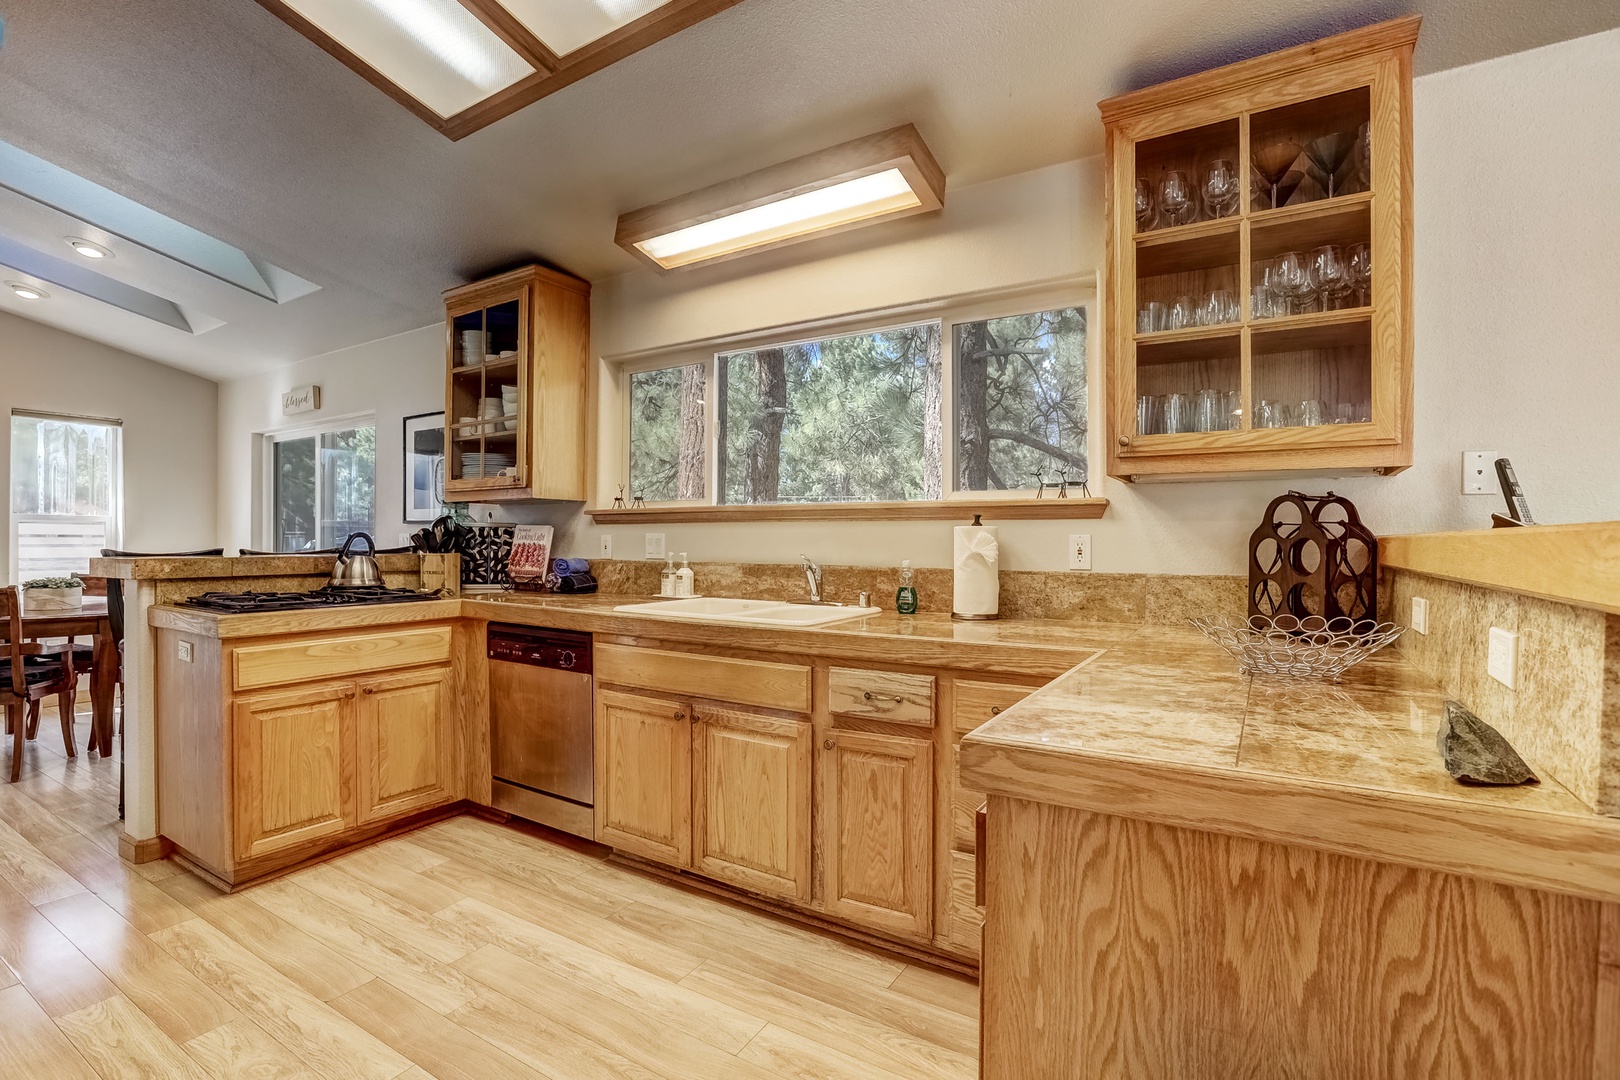 Kitchen with drip coffee maker, toaster oven, blender, waffle maker, slow cooker, and more!